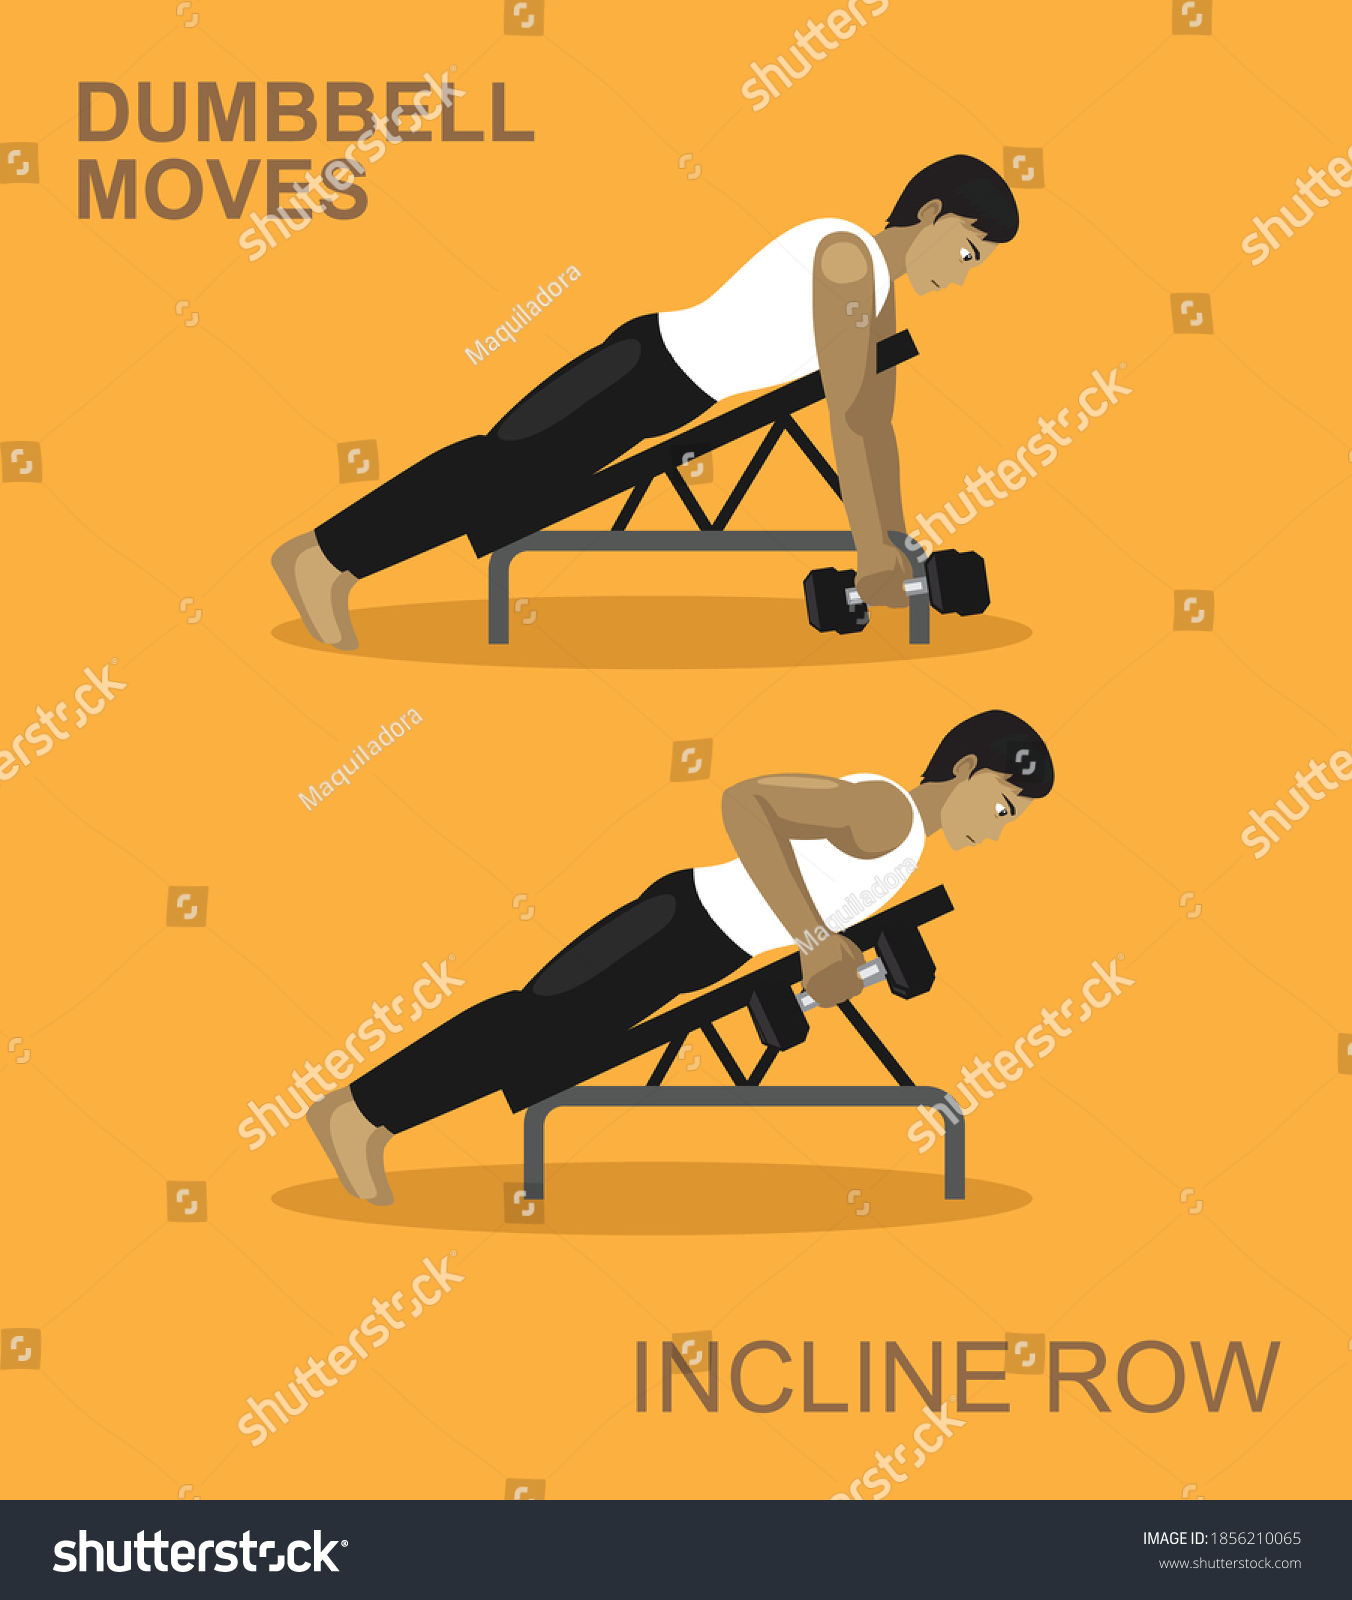 Incline Row Dumbbell Moves Manga Gym Stock Vector Royalty Free 1856210065 Shutterstock 2812